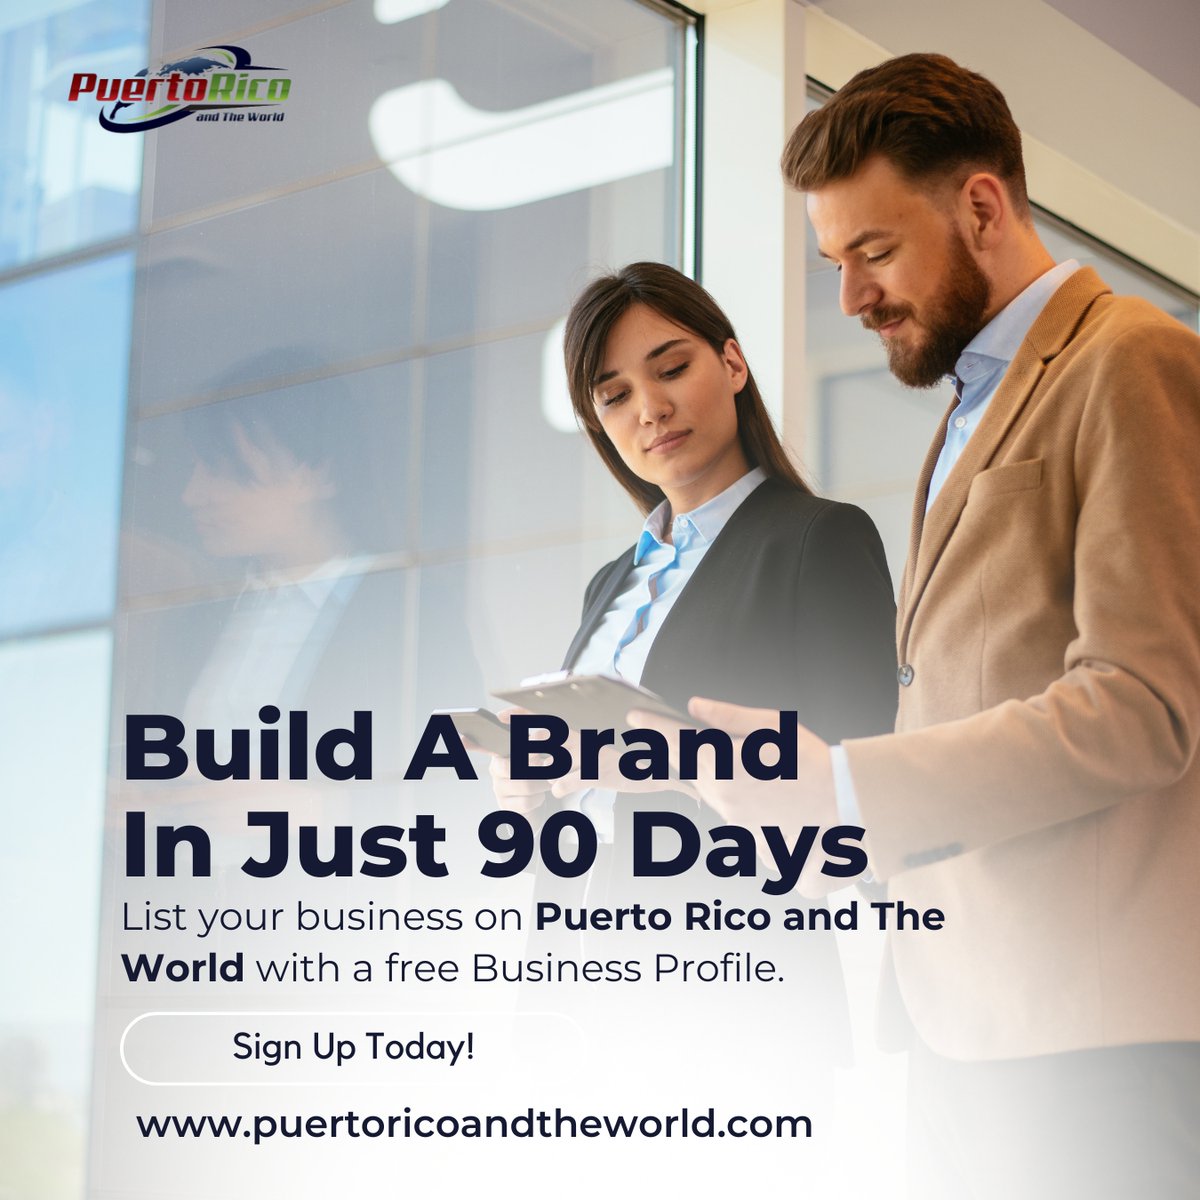 Build A Brand In Just 90 Days.

List your business on Google with a free Business Profile.

✅ puertoricoandtheworld.com/register

#businesslisting #businessmarketing #puertorico